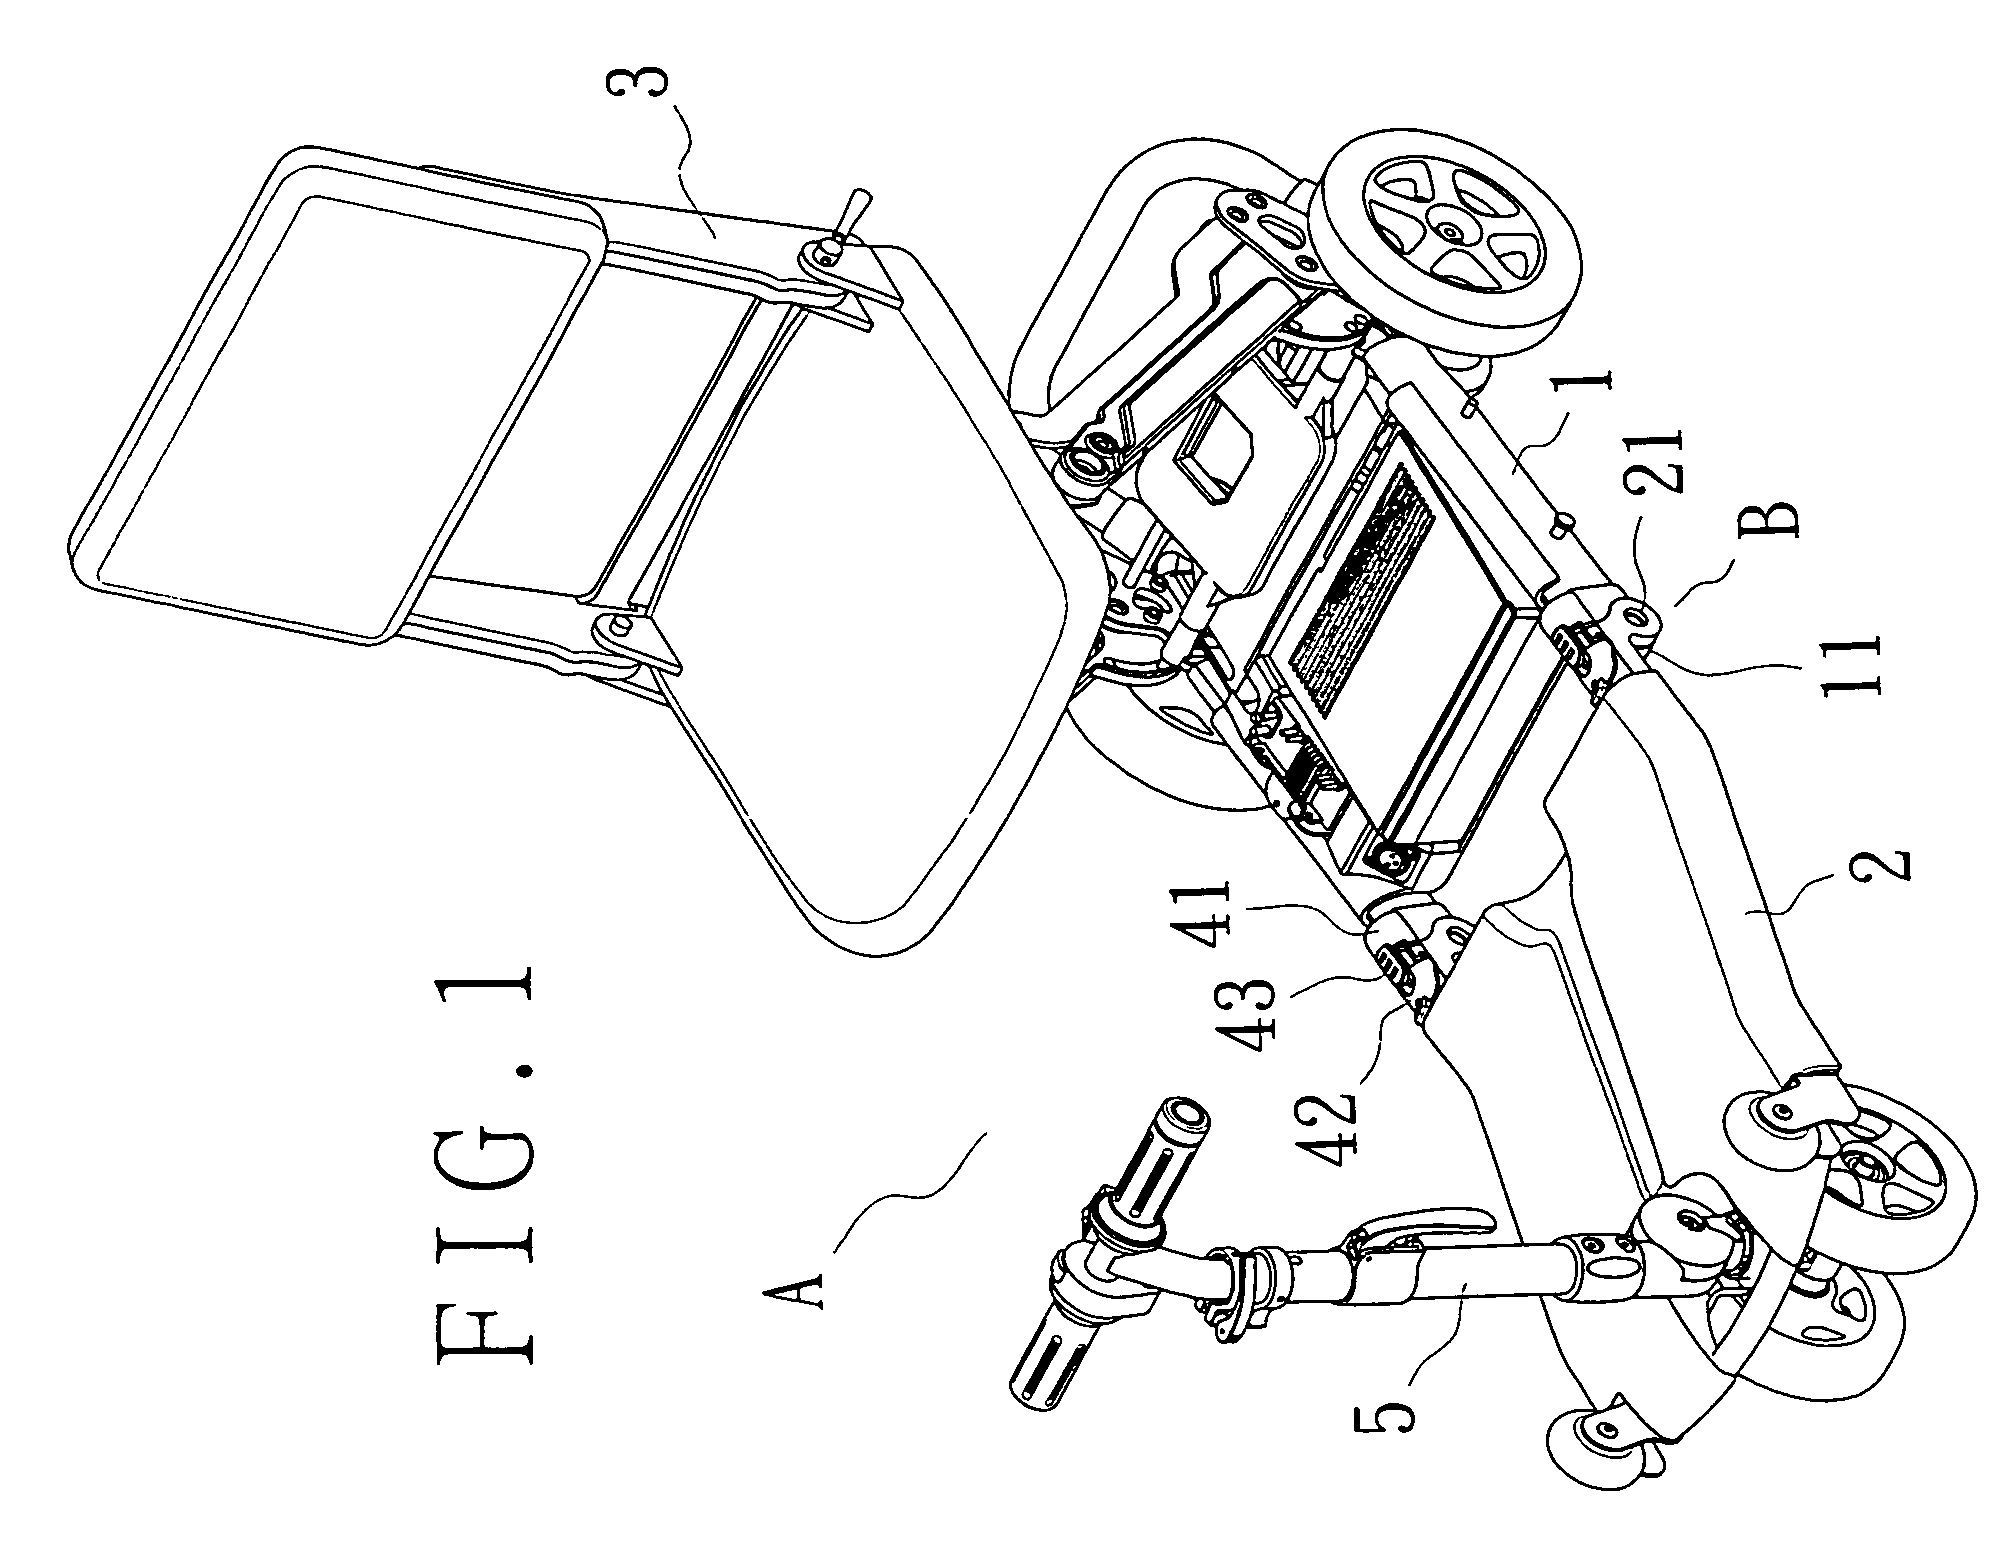 Fixing device for a foldable chassis of an electric walk-substituting vehicle